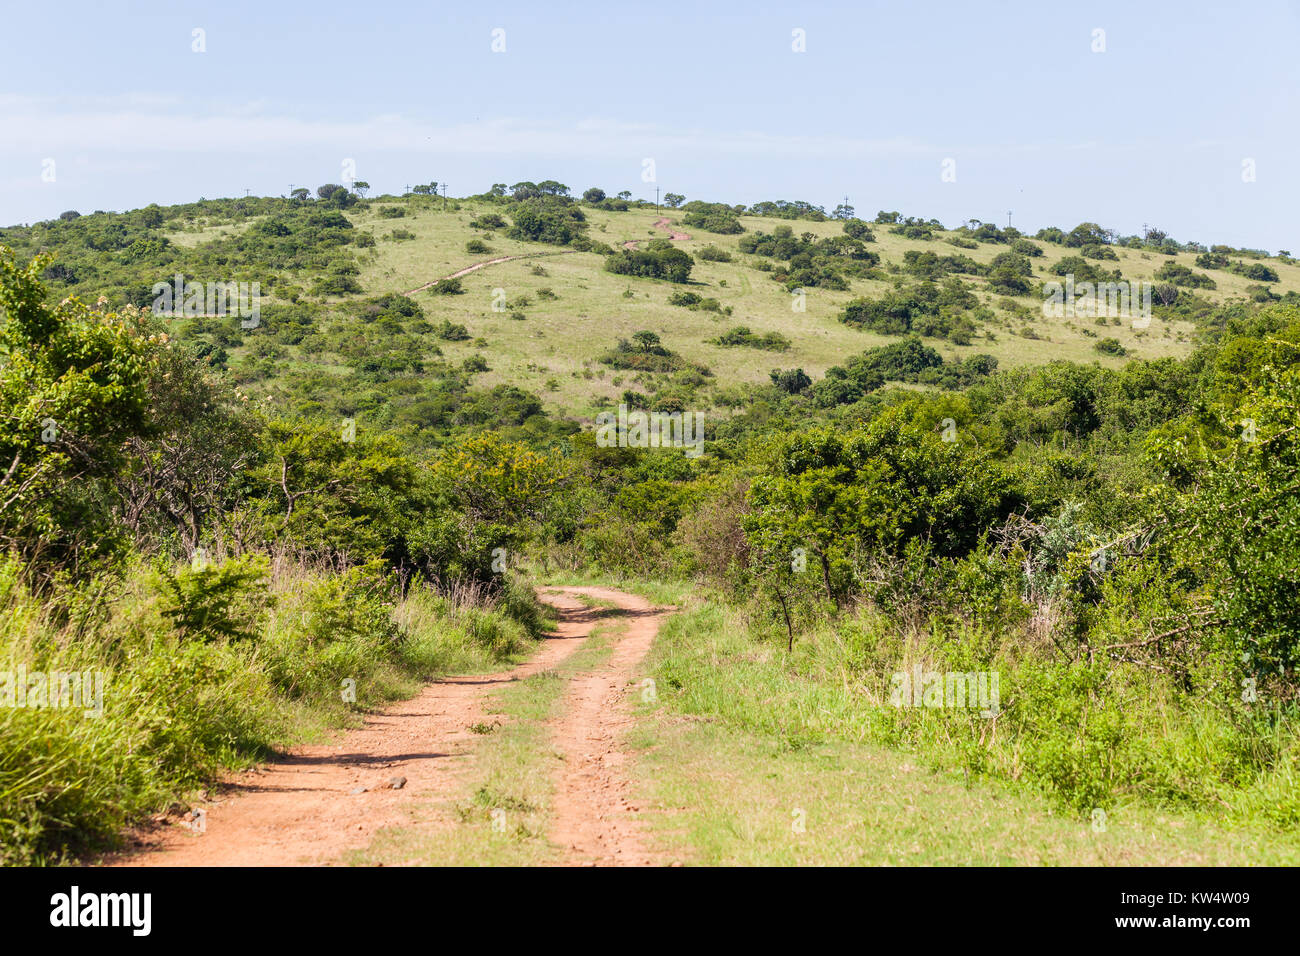 Wilderness wildlife terrain with dirt road track through thick trees aloes bush vegetation landscape Stock Photo